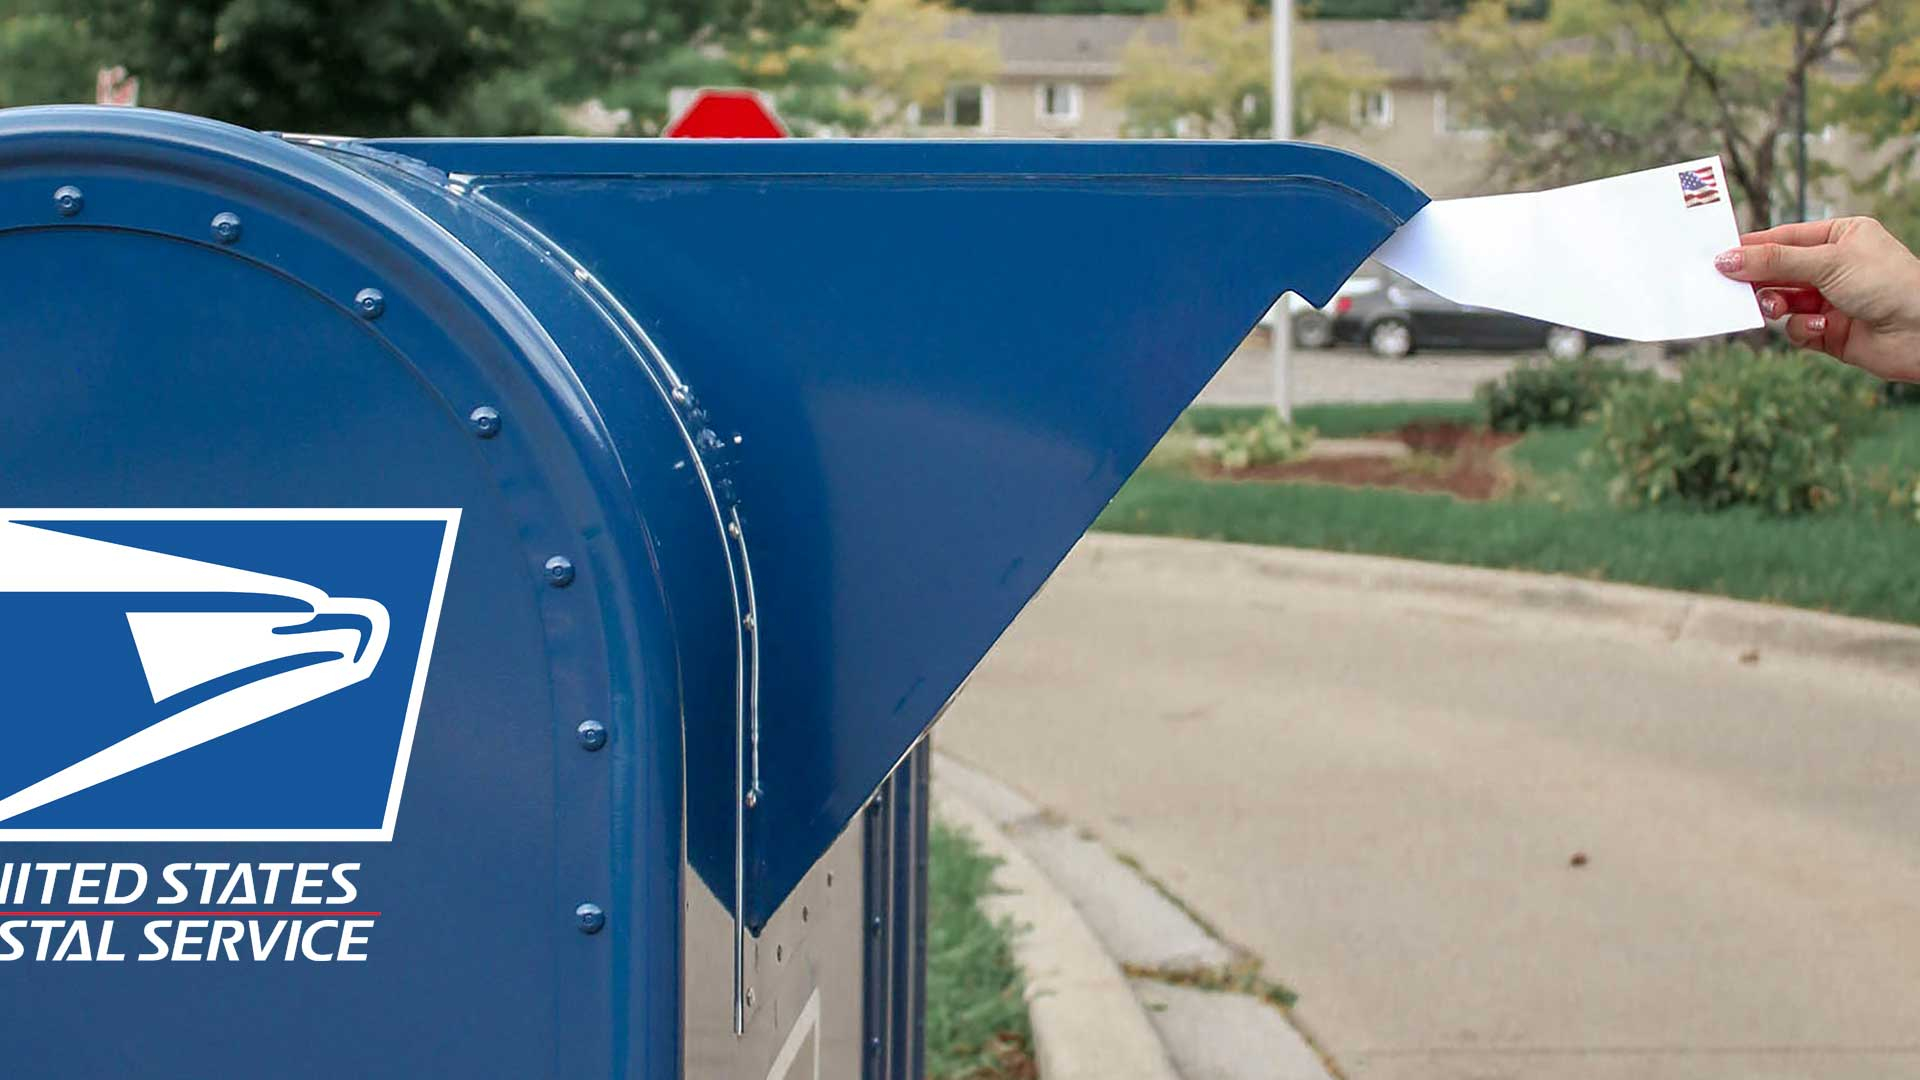 The Second USPS Postage Rate Hike Will Take Place July 9, 2023